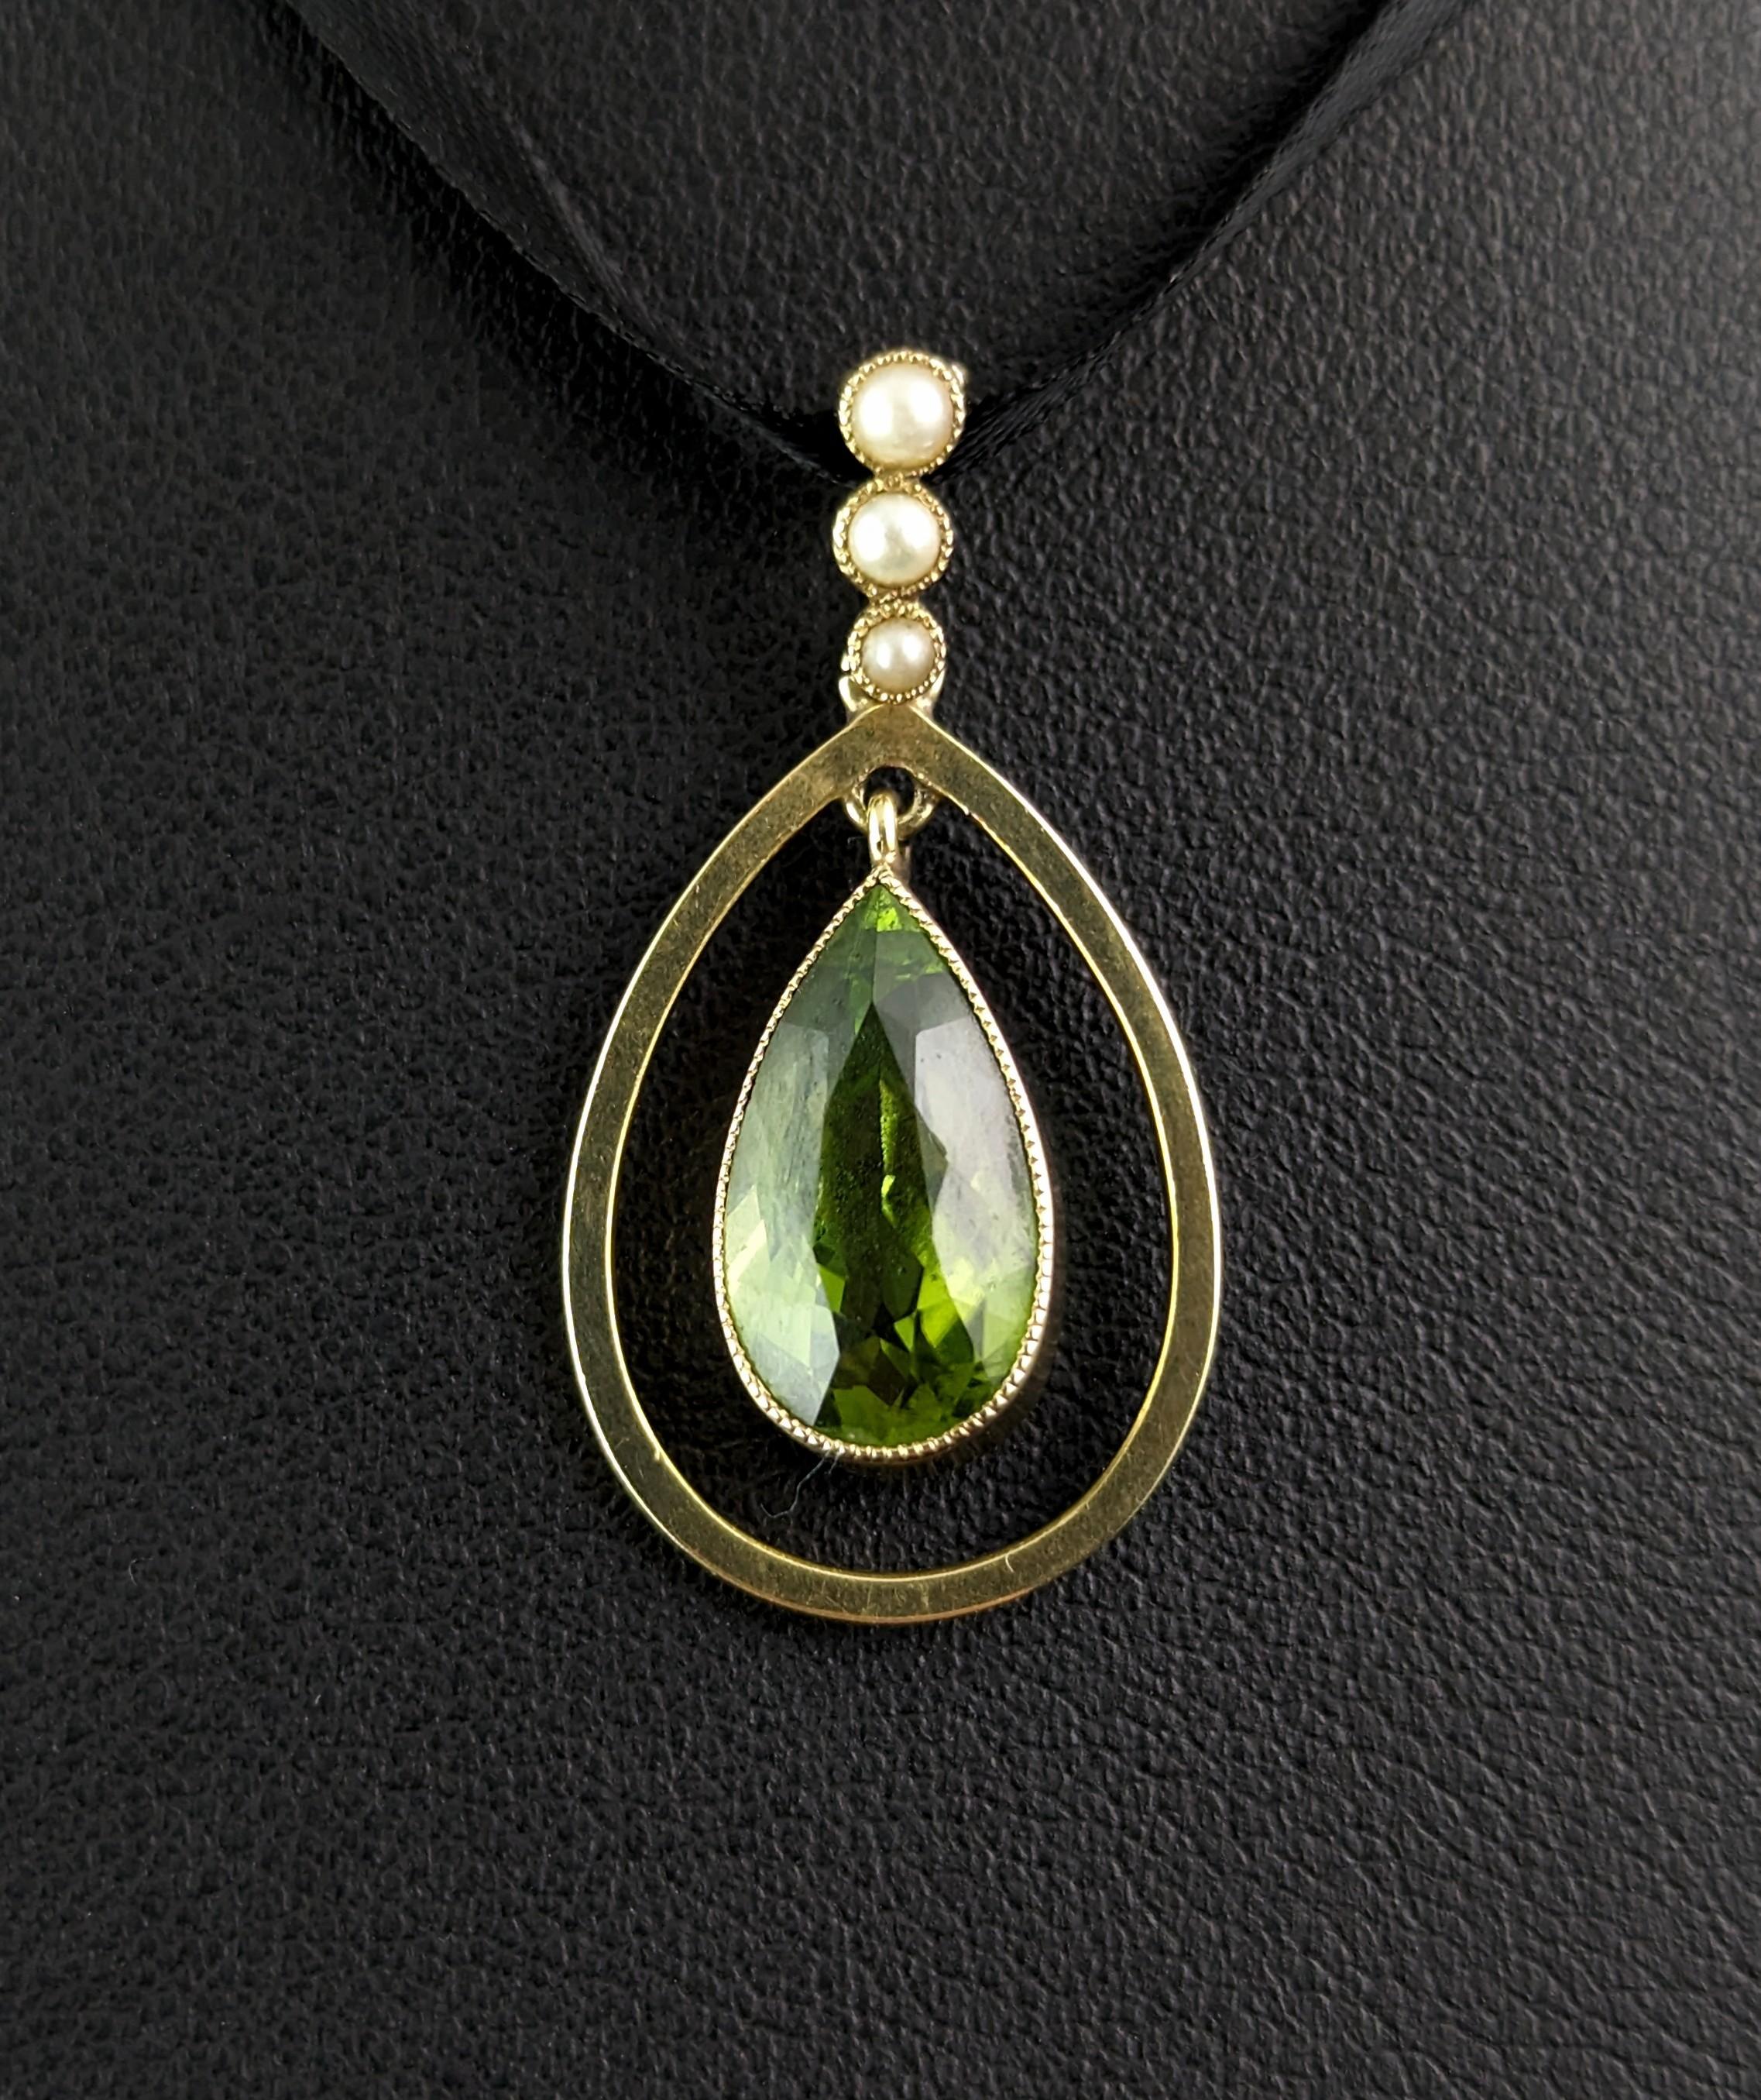 The Art Nouveau era really opened up the world to some beautiful delicate jewels, like this beautiful antique, Art Nouveau era Peridot and seed pearl pendant.

The pendant has a large pear cut Peridot suspended from the centre in a smooth gold bezel